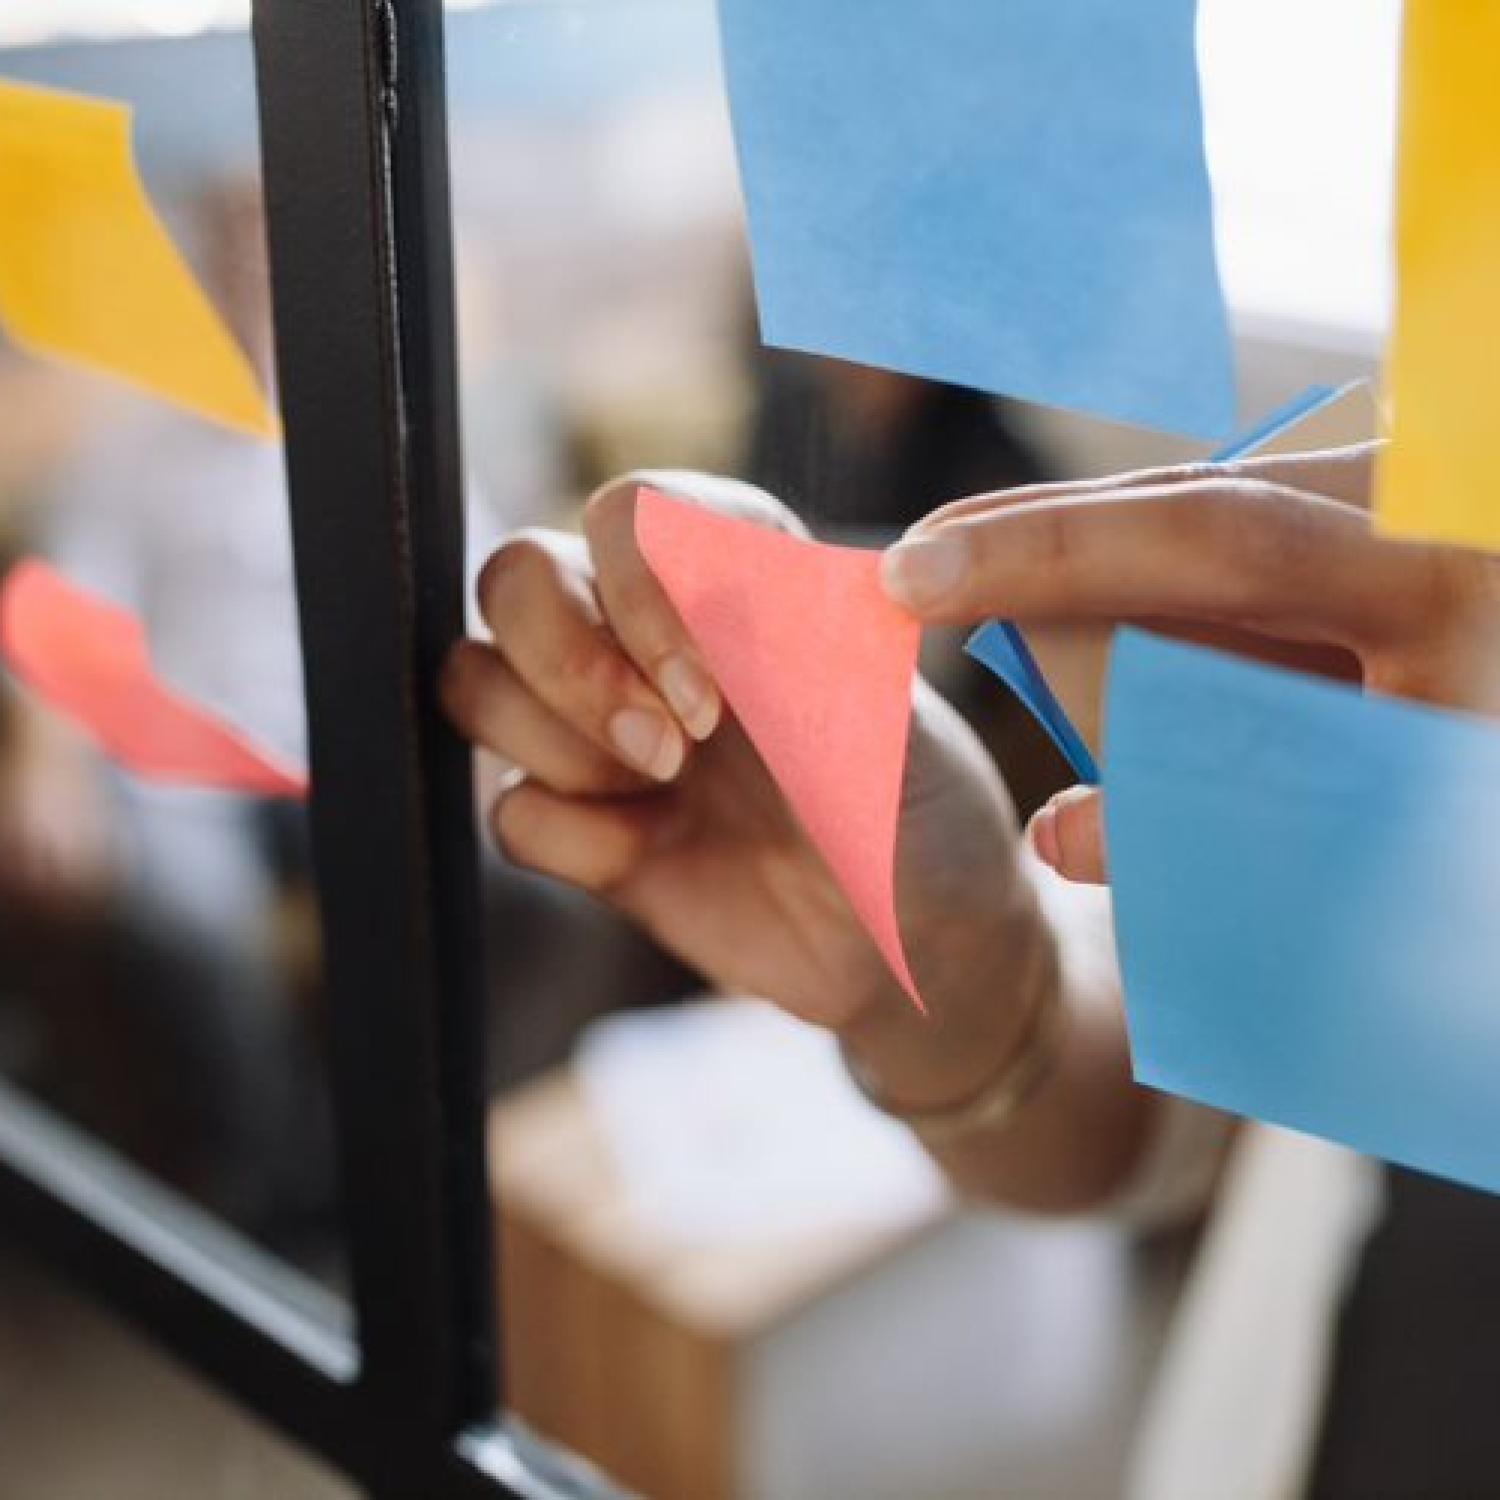 image showing sticky notes on glass